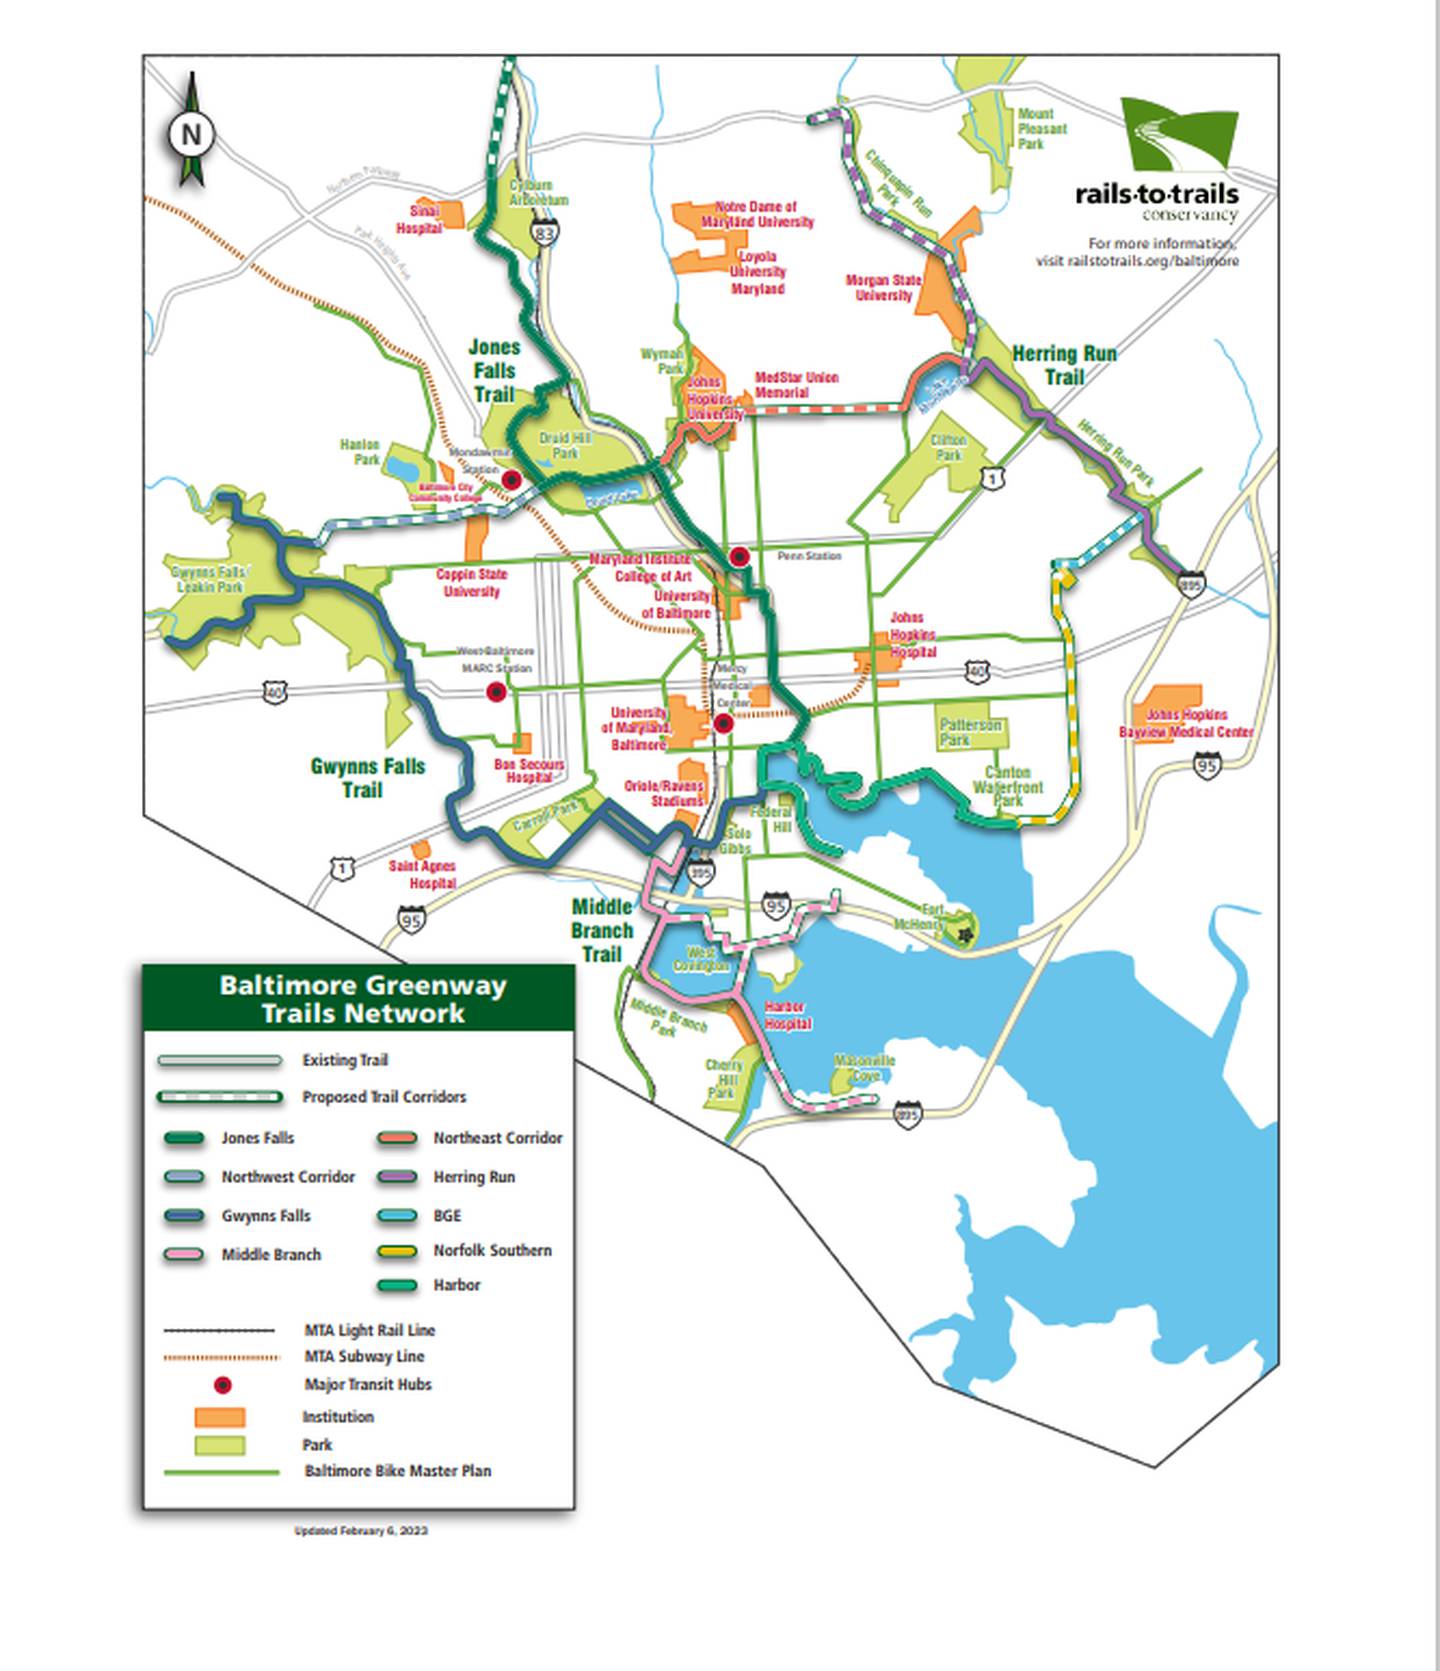 The Baltimore Greenway Trails Network project plans to connect existing trails and create a 35-mile loop throughout Baltimore city.